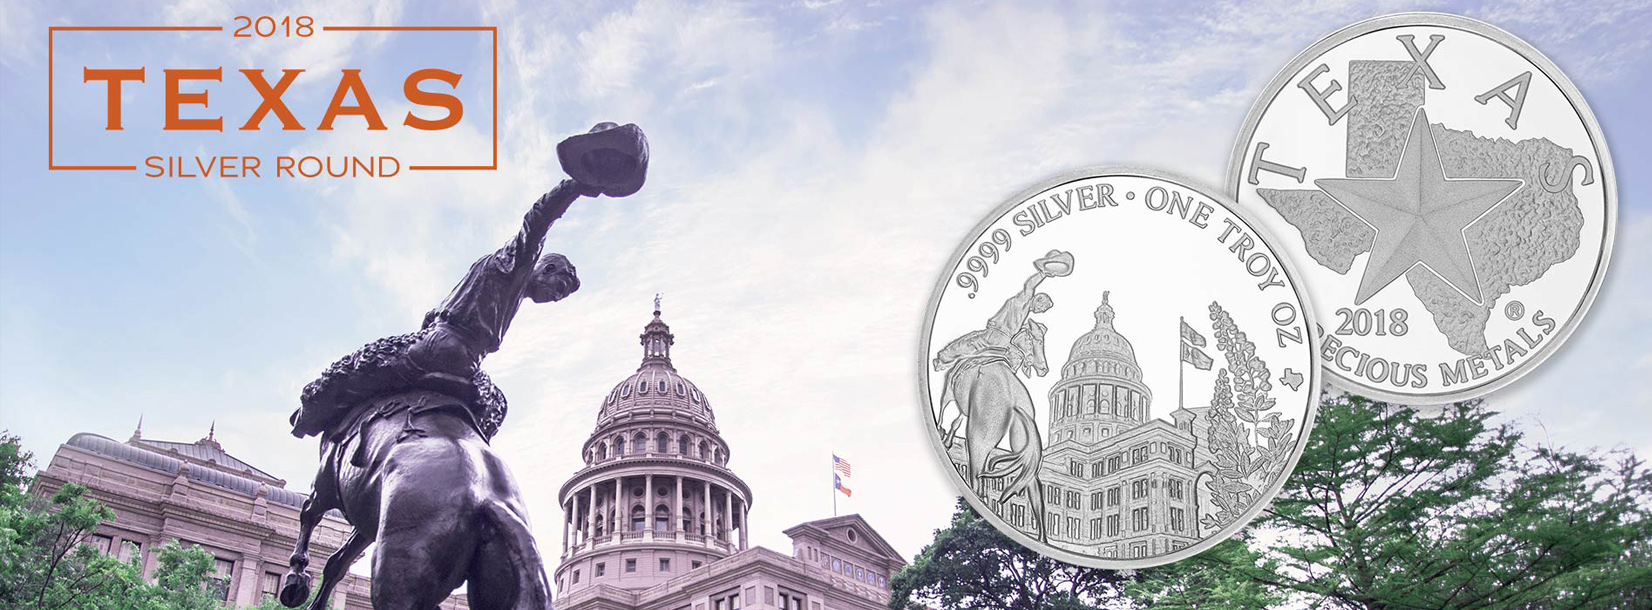 The 2018 Texas Silver Round is here!